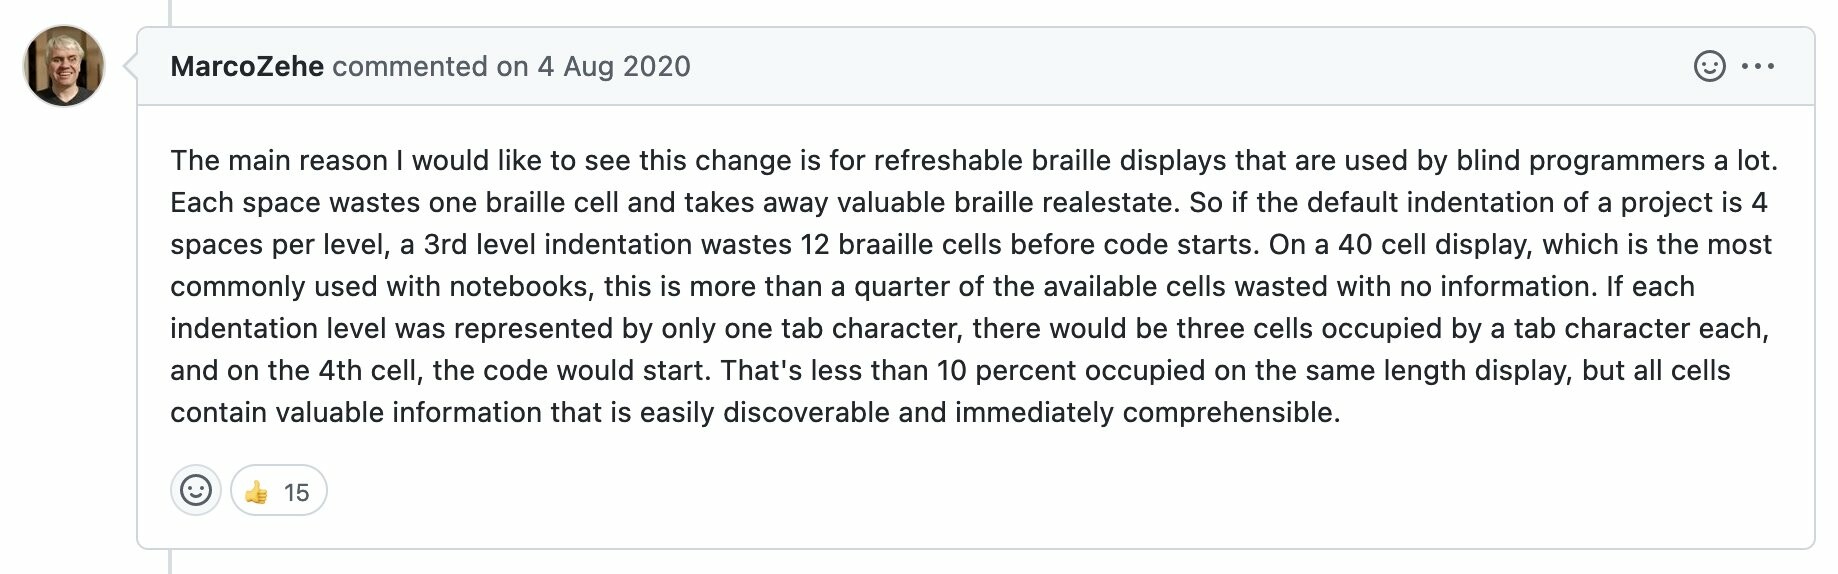 Github comment from MarcoZehe on 4 Aug 2020: The main reason I would like to see this change is for refreshable braille displays that are used by blind programmers a lot. Each space wastes one braille cell and takes away valuable braille realestate. Do if the default indentation of a project is 4 spaces per level, a 3rd level indentation wastes 12 braille cells before code starts. On a 40 cell display, which is the most commonly used with notebooks, this is more than a quarter of the available cells wasted with no information. If each indentation was represented by only one tab character, there would be three cells occupied by a tab character each, and on the 4th cell, the code would start. That's less than 10 percent occupied on the same length display, but all cells contain valuable information that is easily discoverable and immediately comprehensible. 